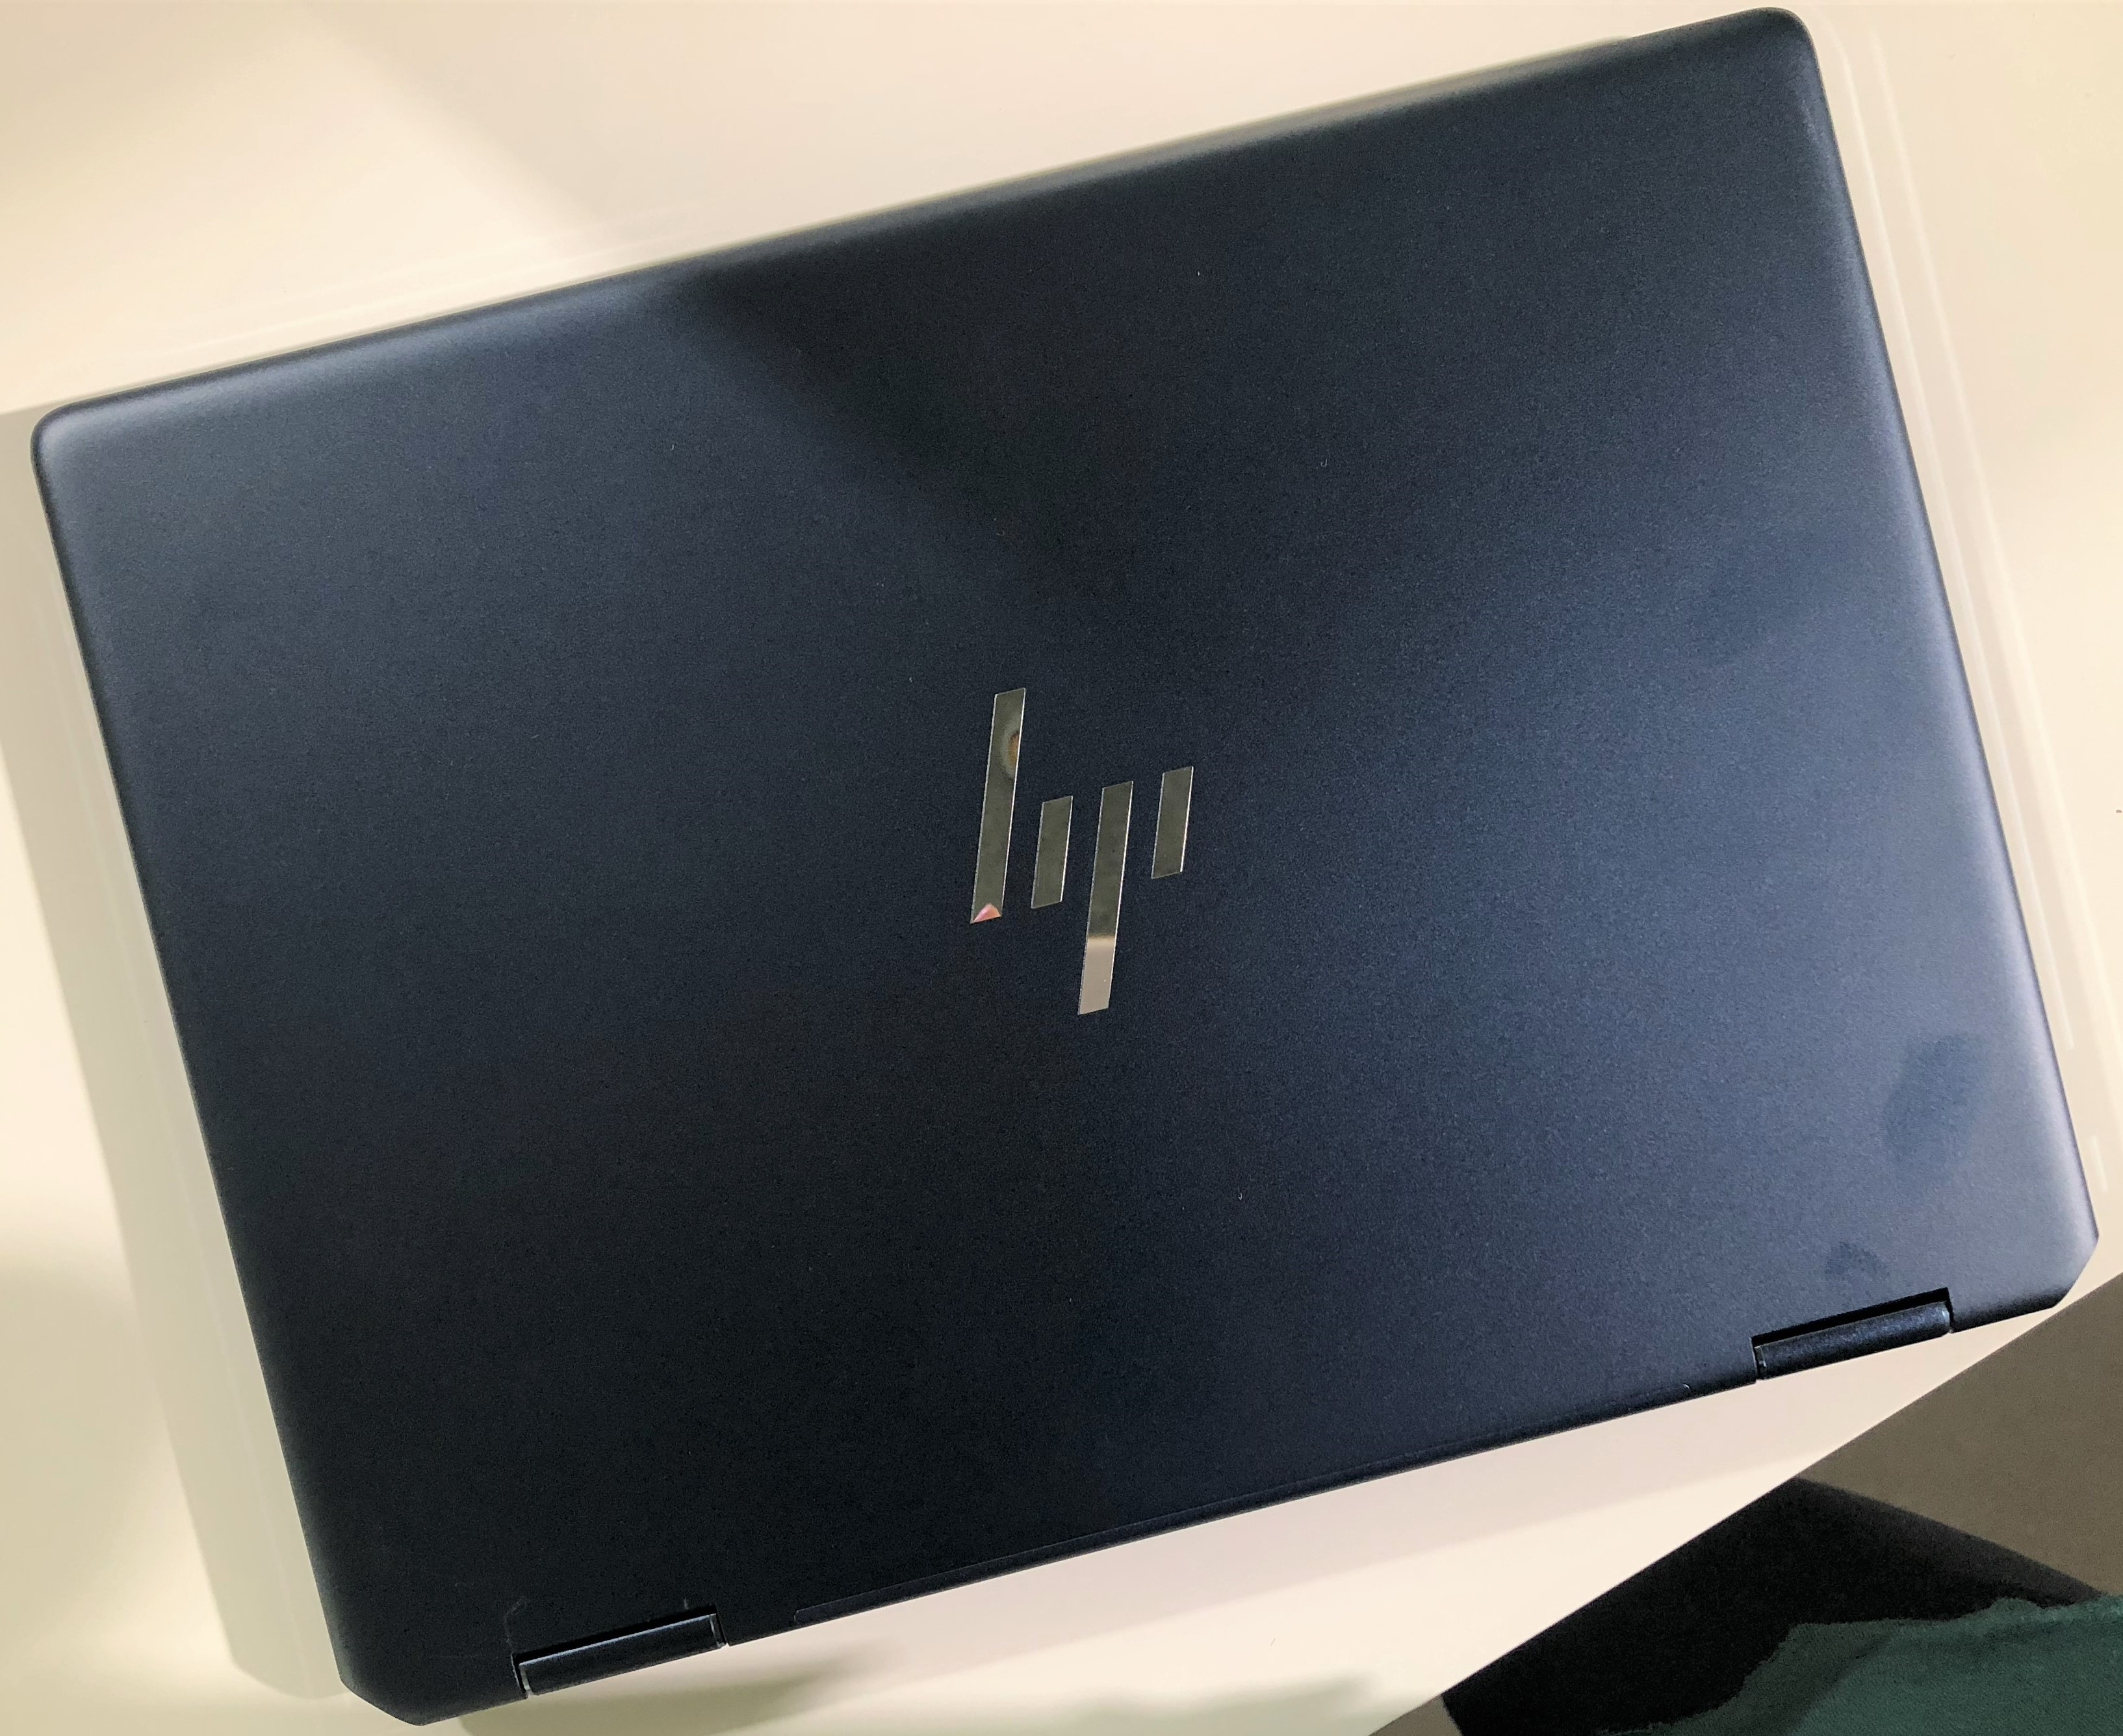 HP’s new Spectre laptops include options with Intel Arc, less noise ctm